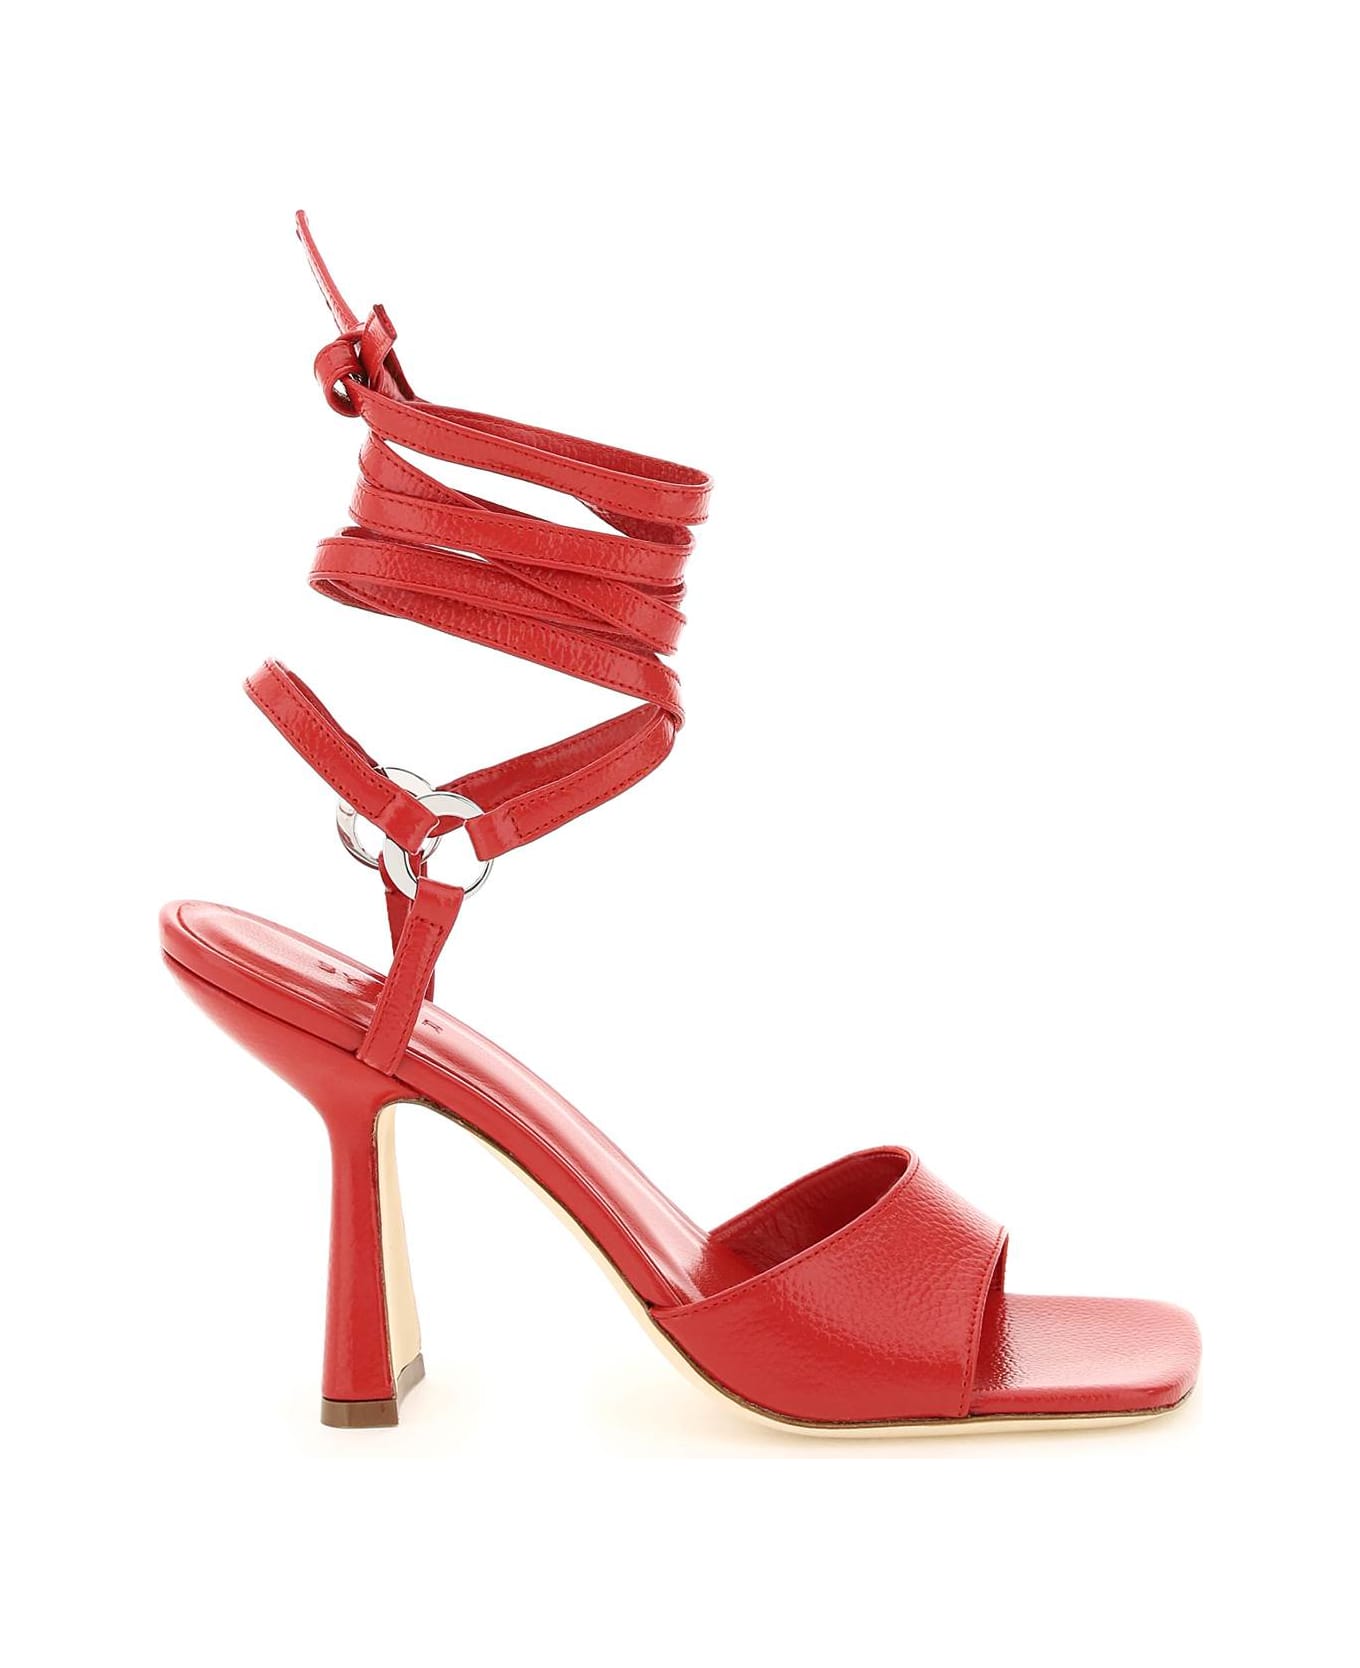 BY FAR Fida Leather Sandals - CHILLY (Red)